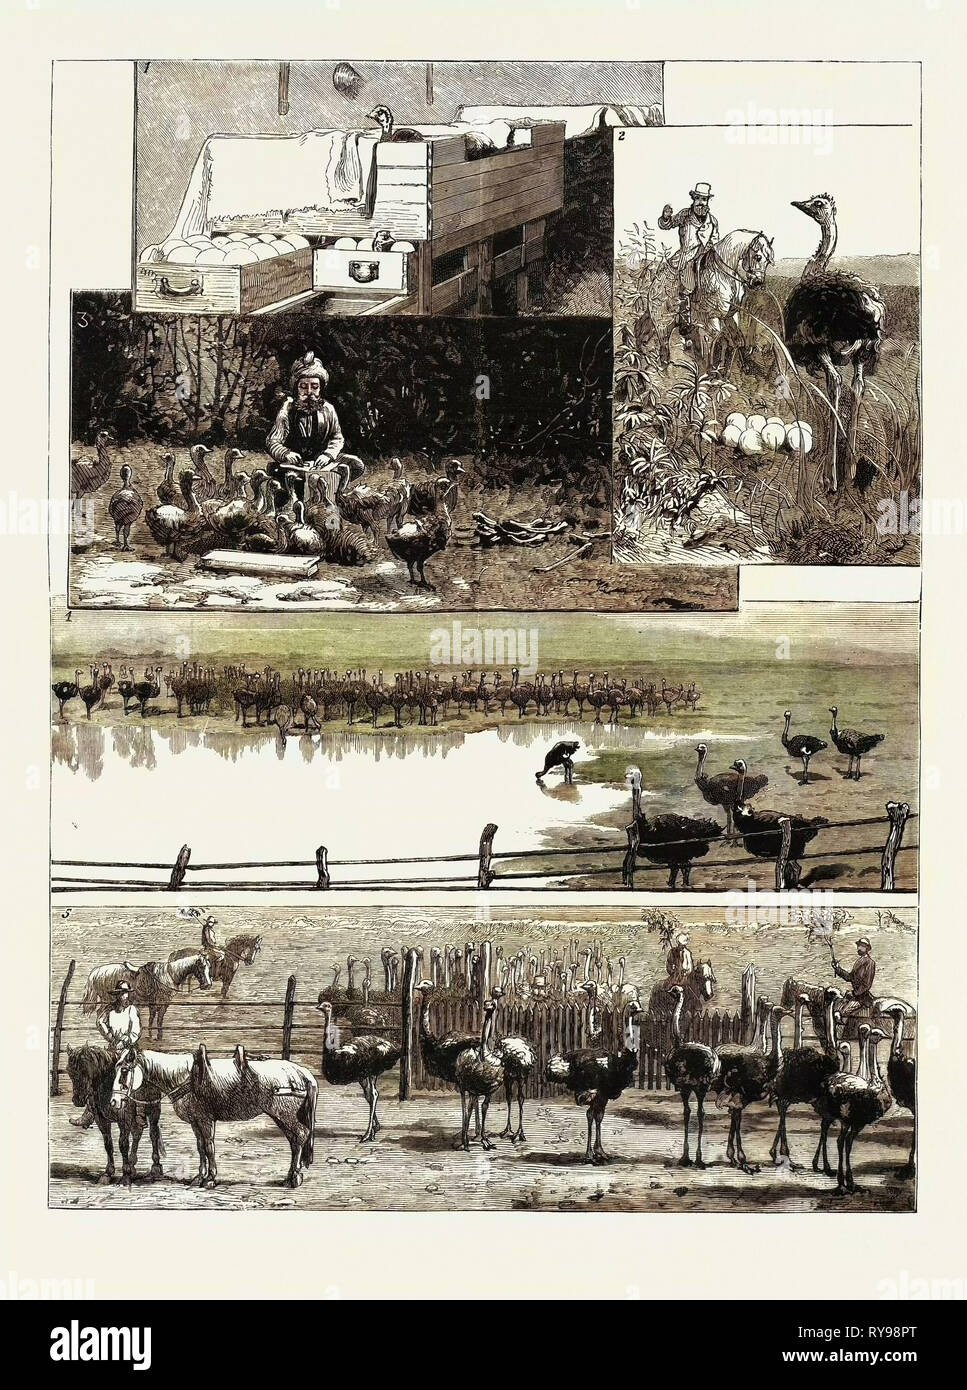 1. Artificial Incubation. 2. A Bird Disturbed from Its Nest. 3. Indian Coolie Nursing Young Birds. 4. Ostriches Drinking 5. Mustering the Birds. Ostrich Farming at Heatherton, Near Grahamstown, South Africa Stock Photo